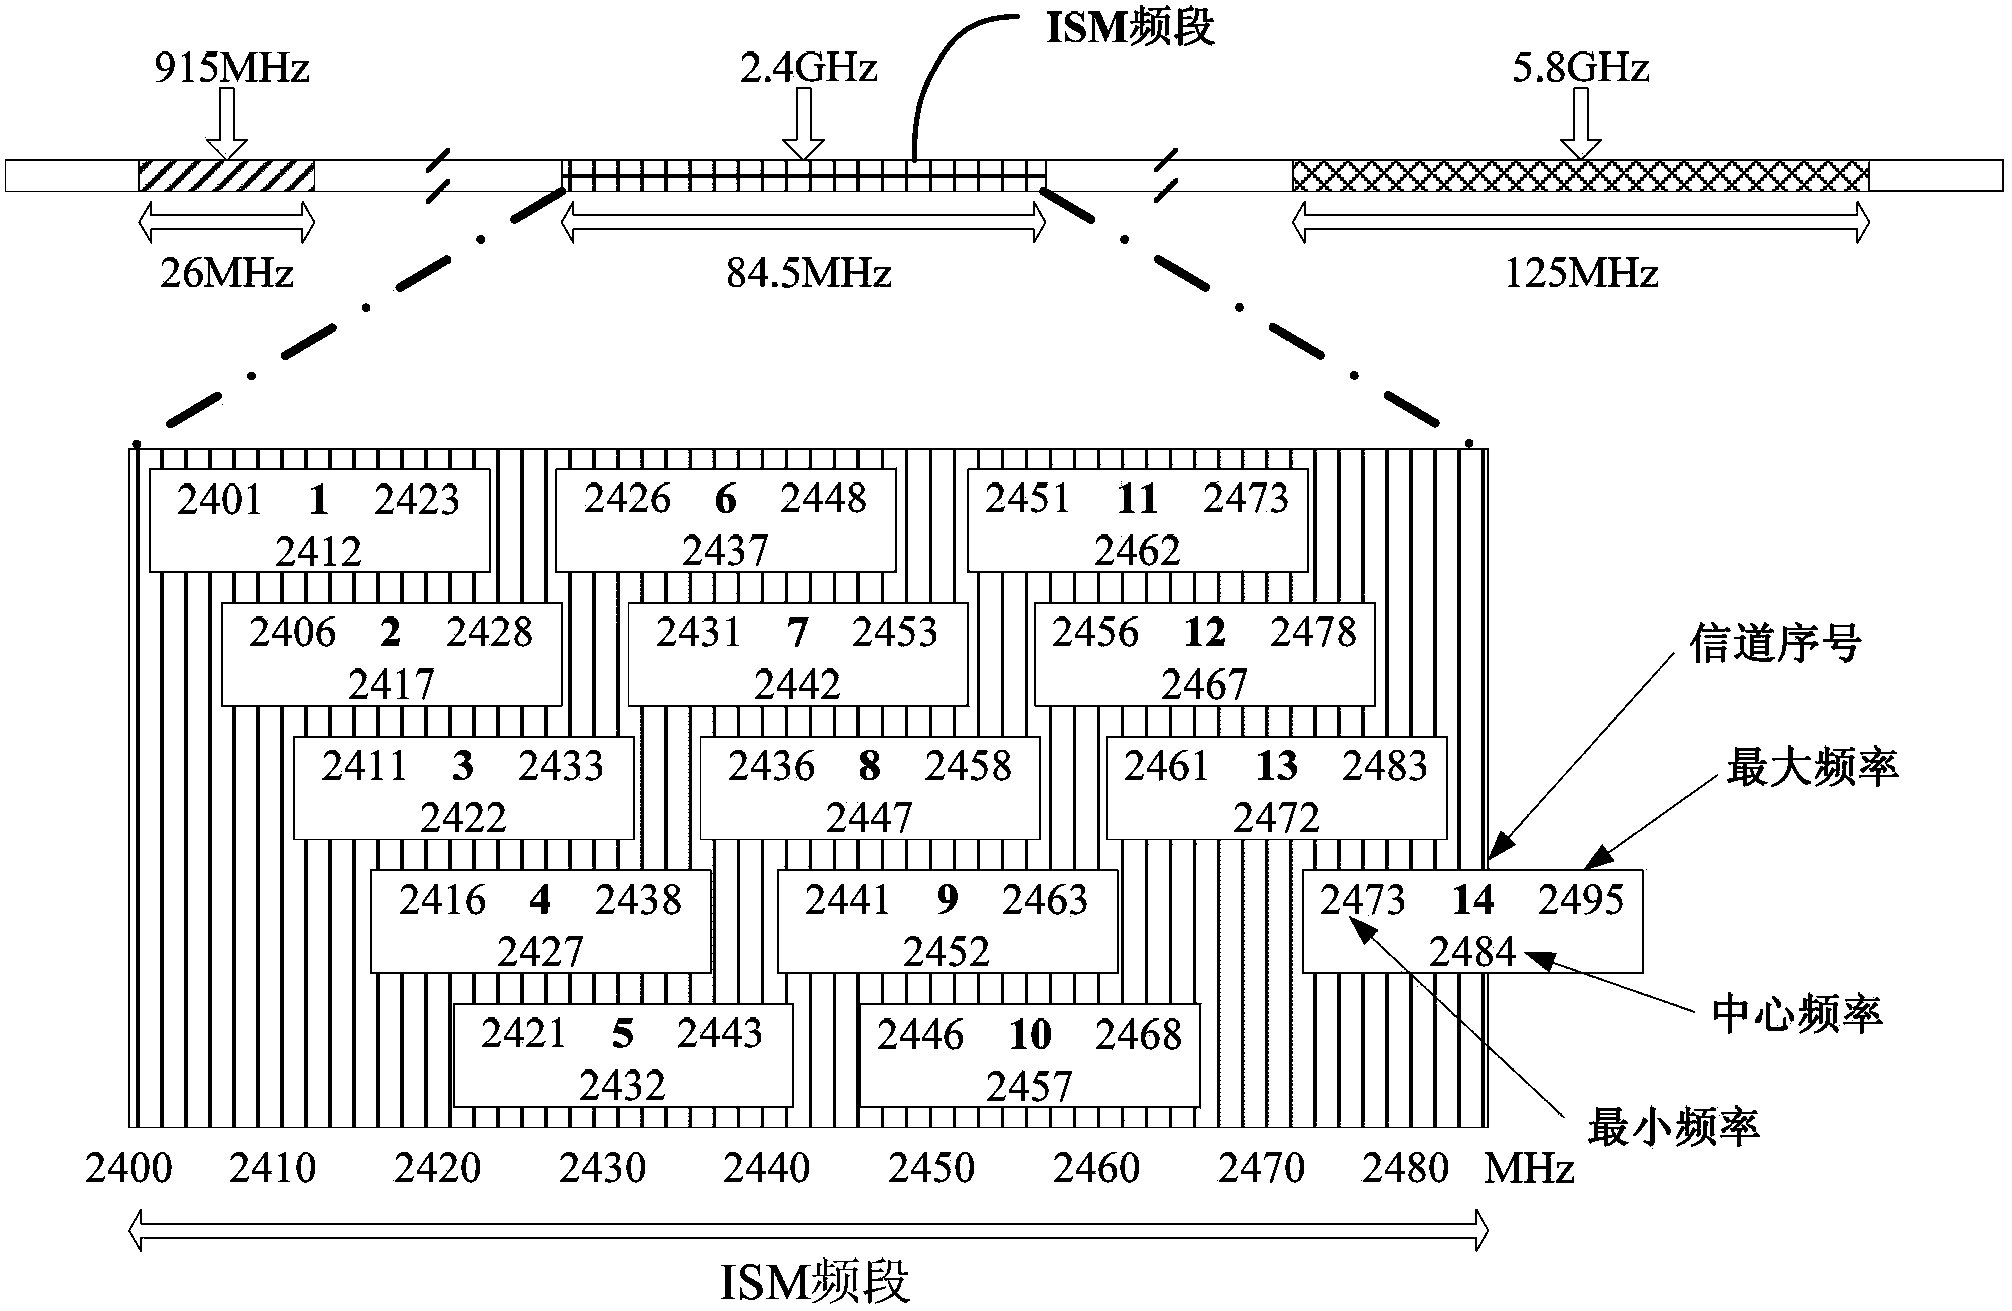 Resource pre-scheduling method for device-to-device (D2D) communication system working under industrial scientific media (ISM) frequency bands